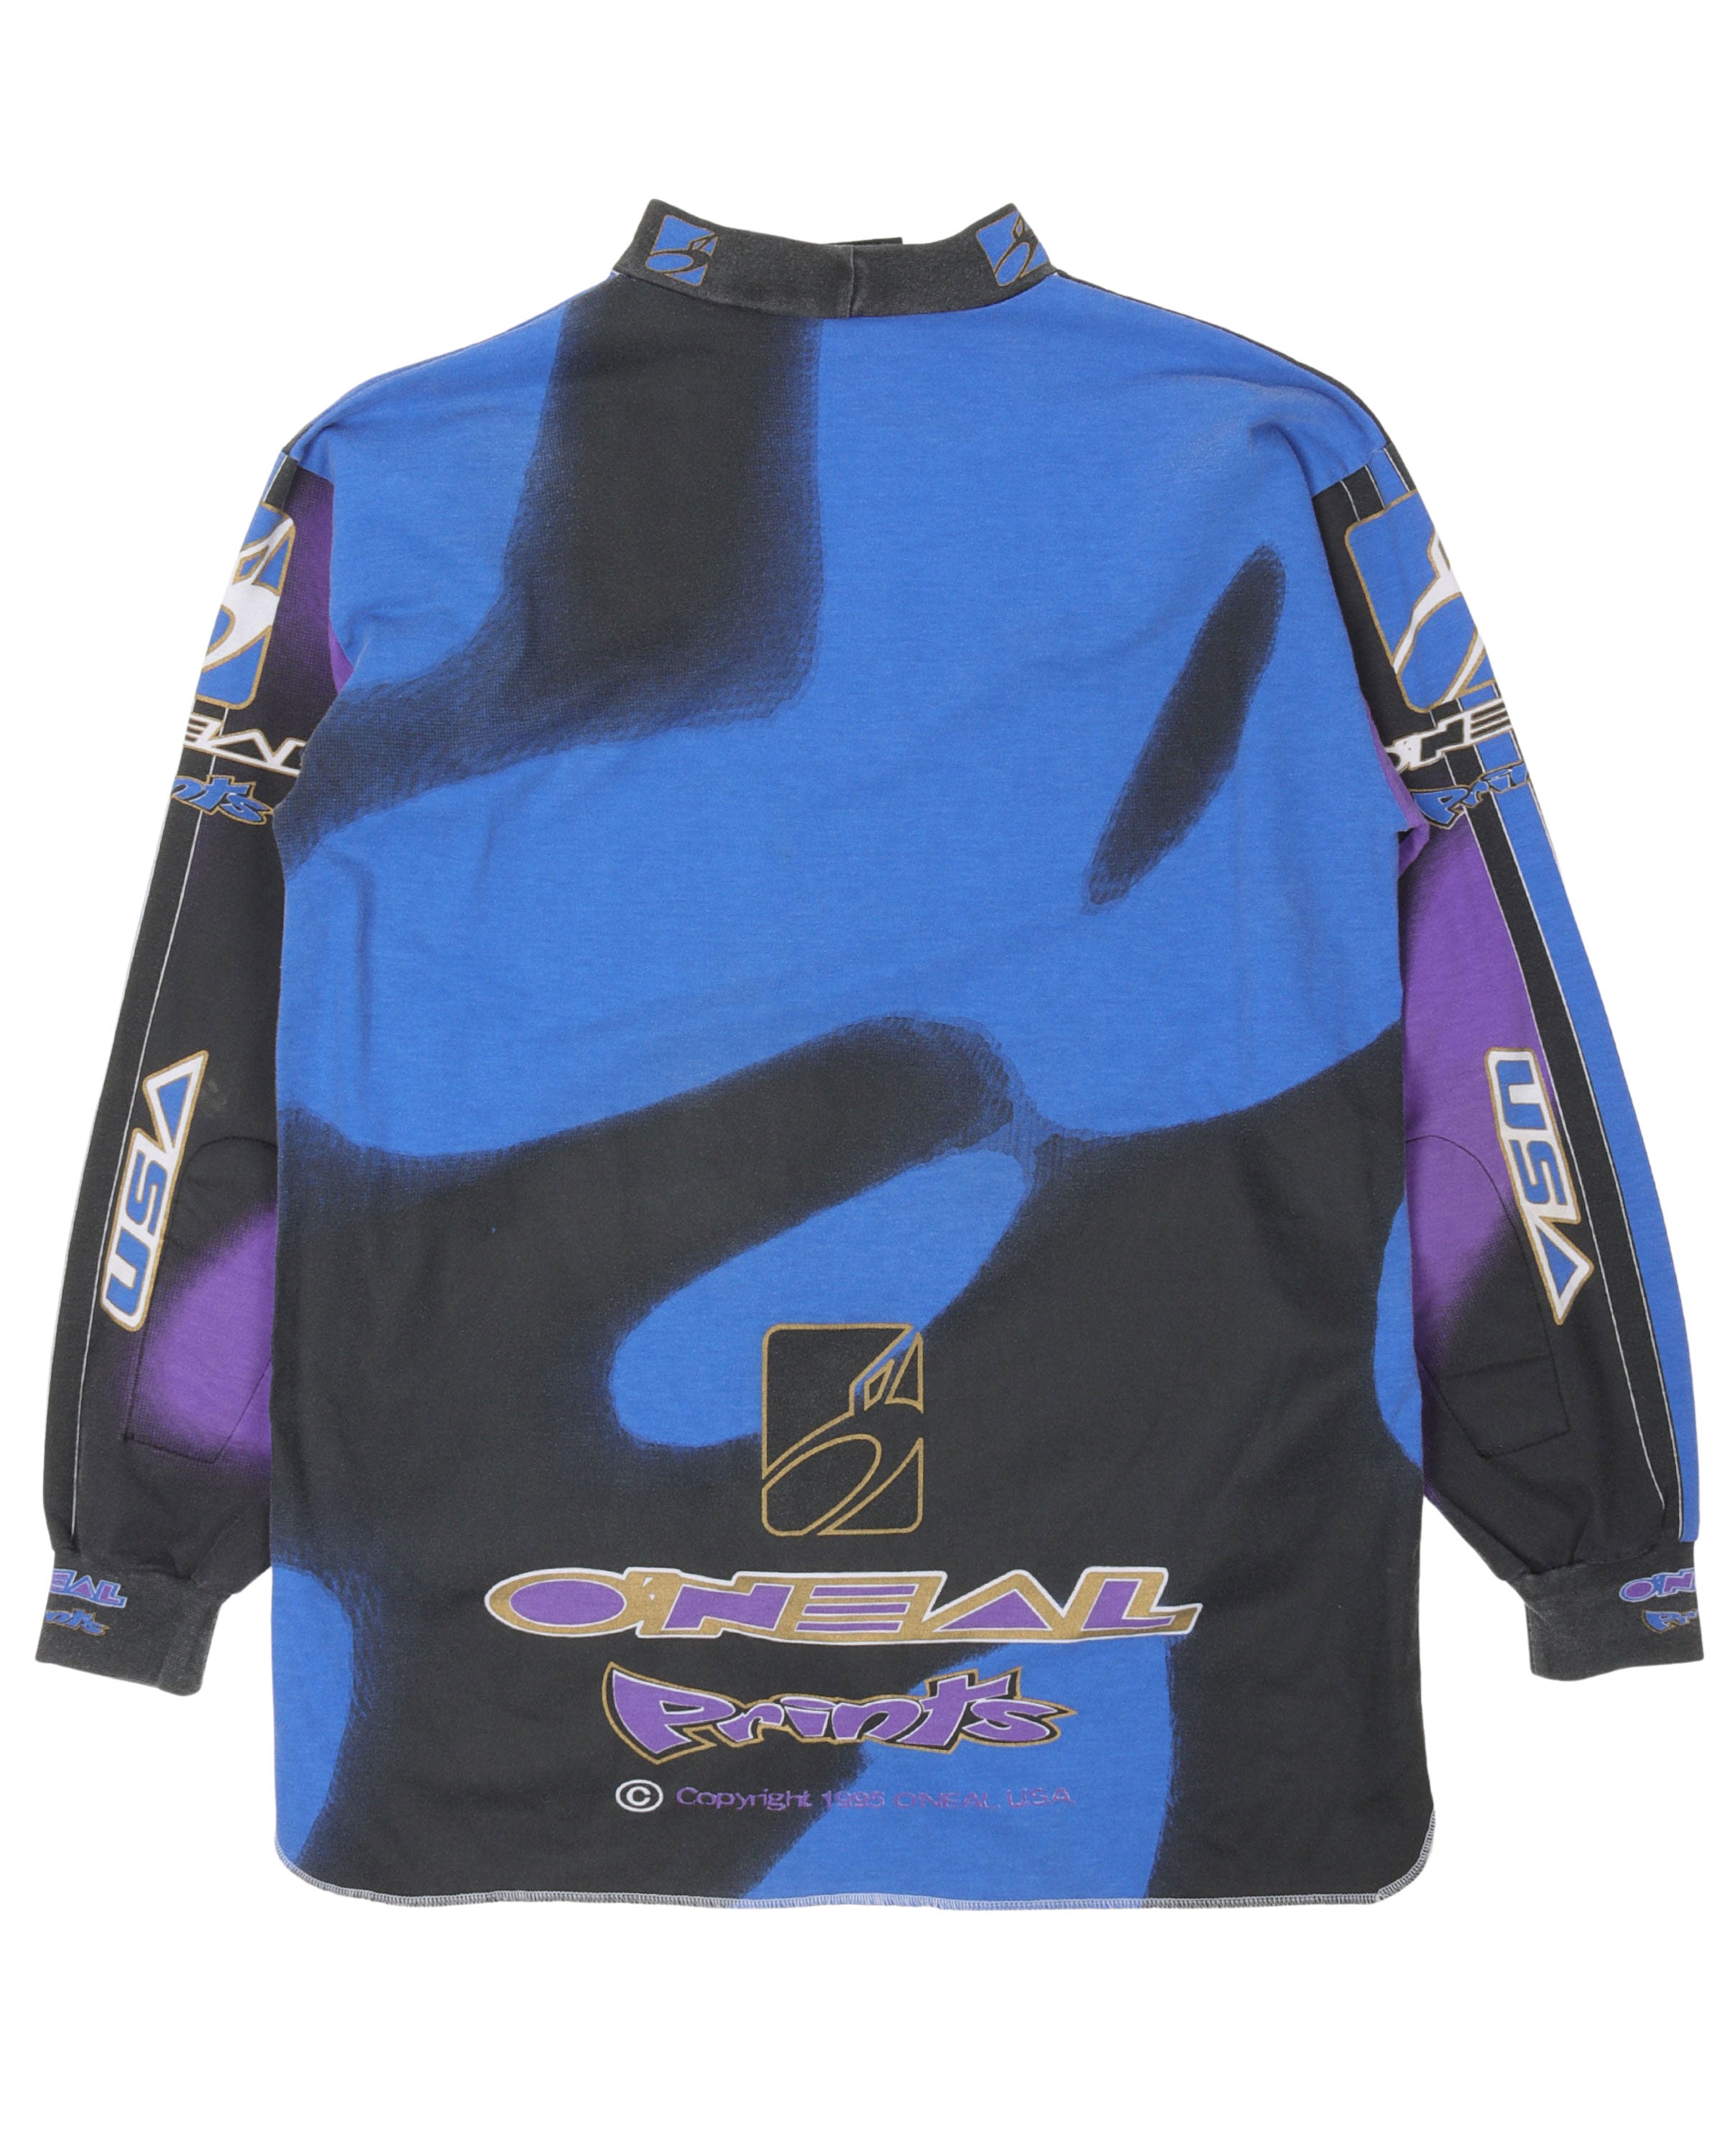 Oneal USA Prints Motocross Jersey